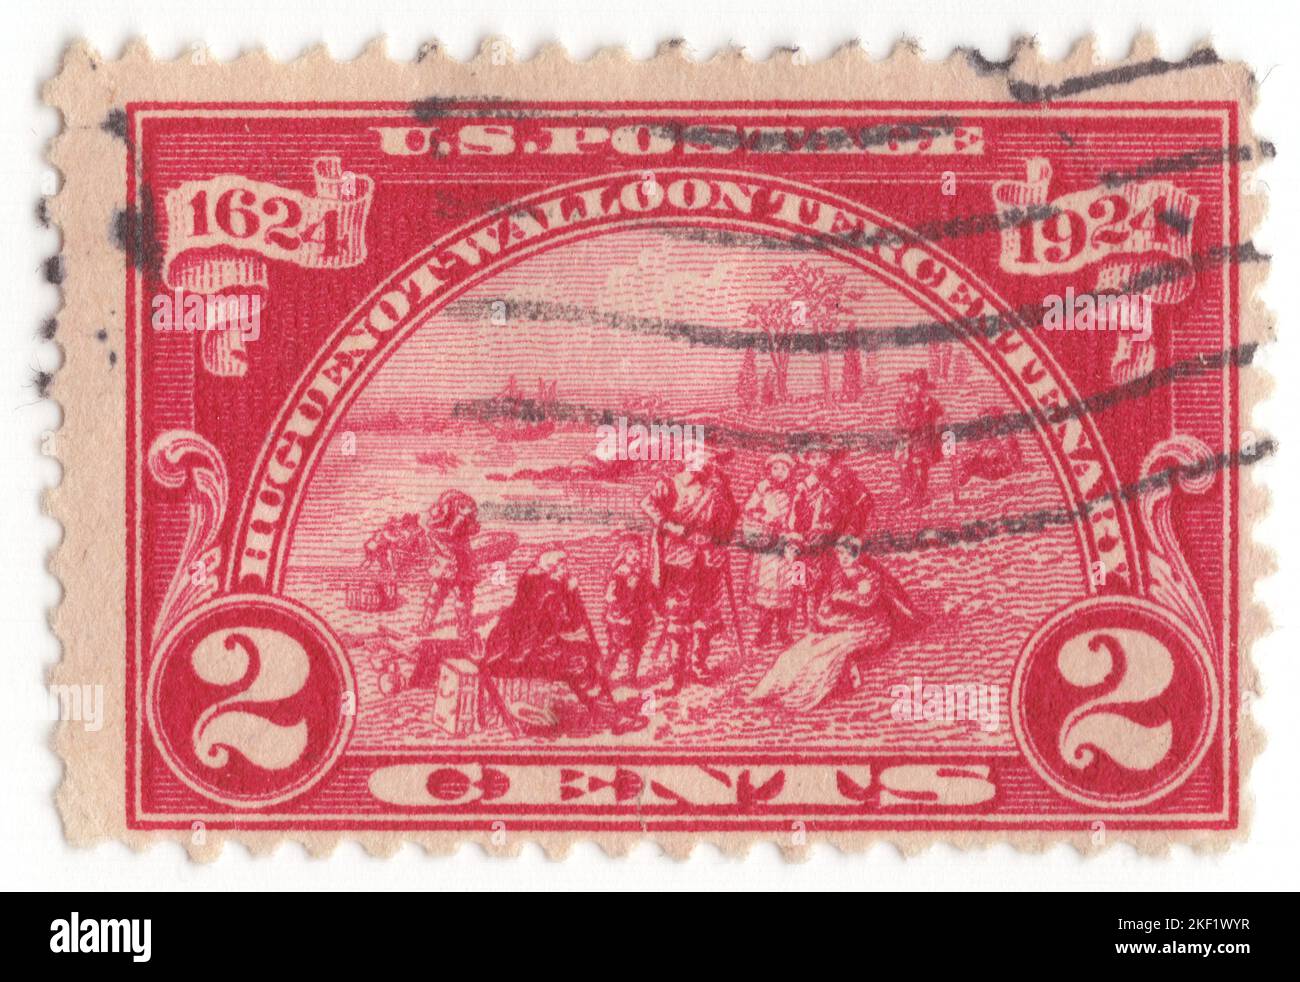 USA - 1924 May 1: An 1 cent dark green postage stamp depicting 'Walloons landing at Fort Orange'. Walloons from the south of Belgium had been persecuted for their Protestant beliefs. Huguenot-Walloon Tercentenary Issue. Settling of the Walloons and in honor of the Huguenots. It marks the 300th anniversary of the voyage of the Nieuw Nederlandt which landed in the New York area in 1624. Many of the passengers were Huguenots from France or Walloons from what is now Belgium; they became early settlers of New York State and the surrounding area Stock Photo